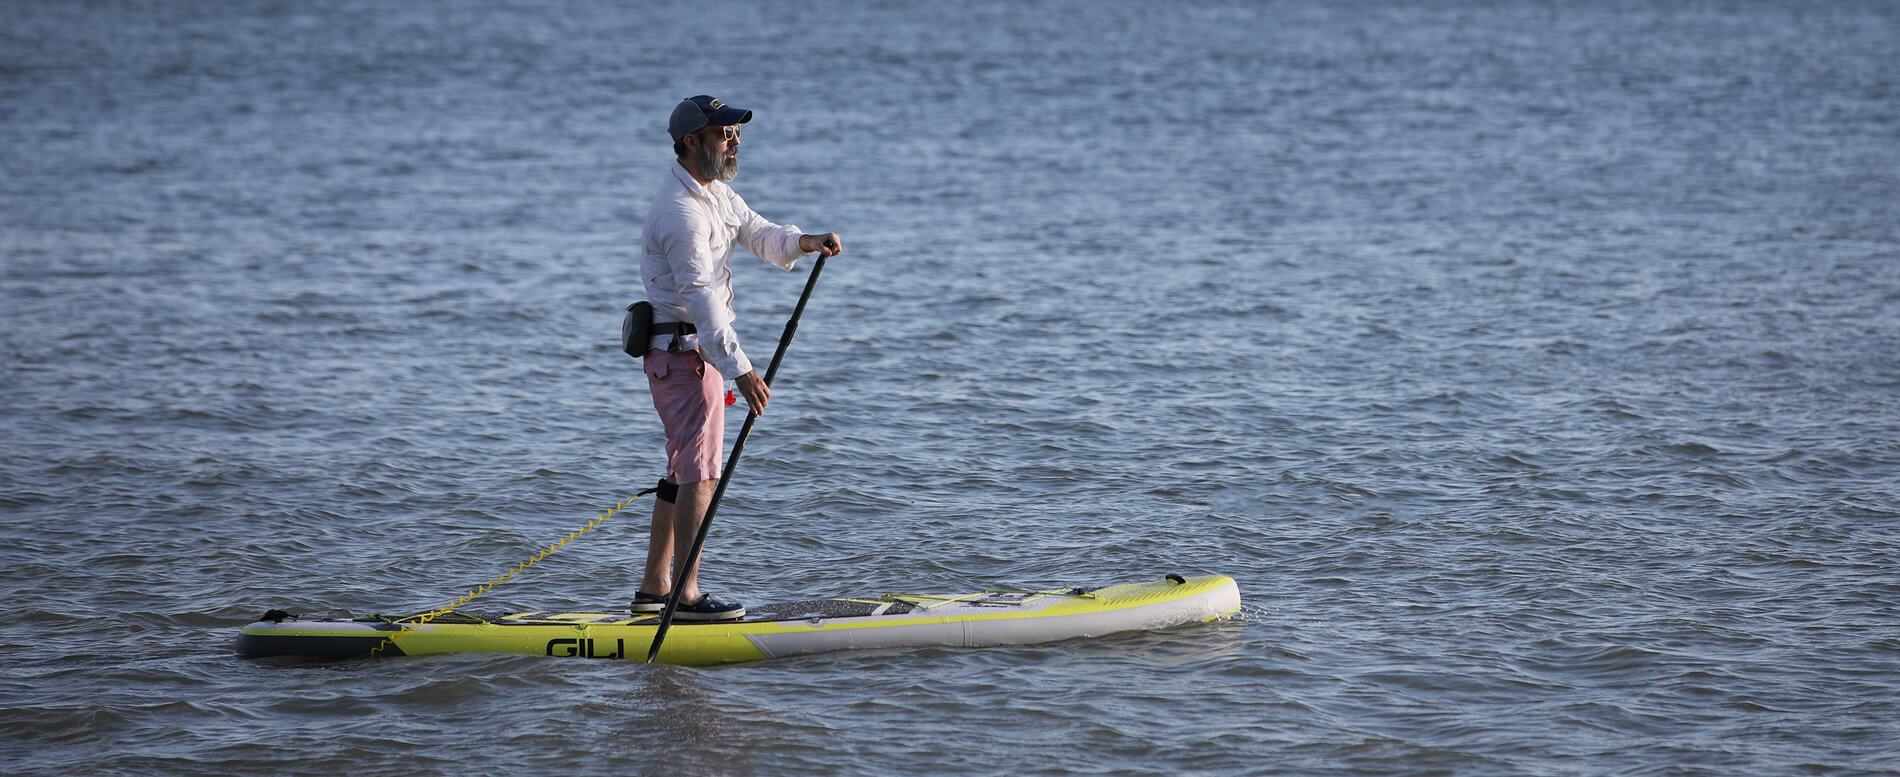 SUP Fitness: How Many Calories Do You Burn While Paddle Boarding?